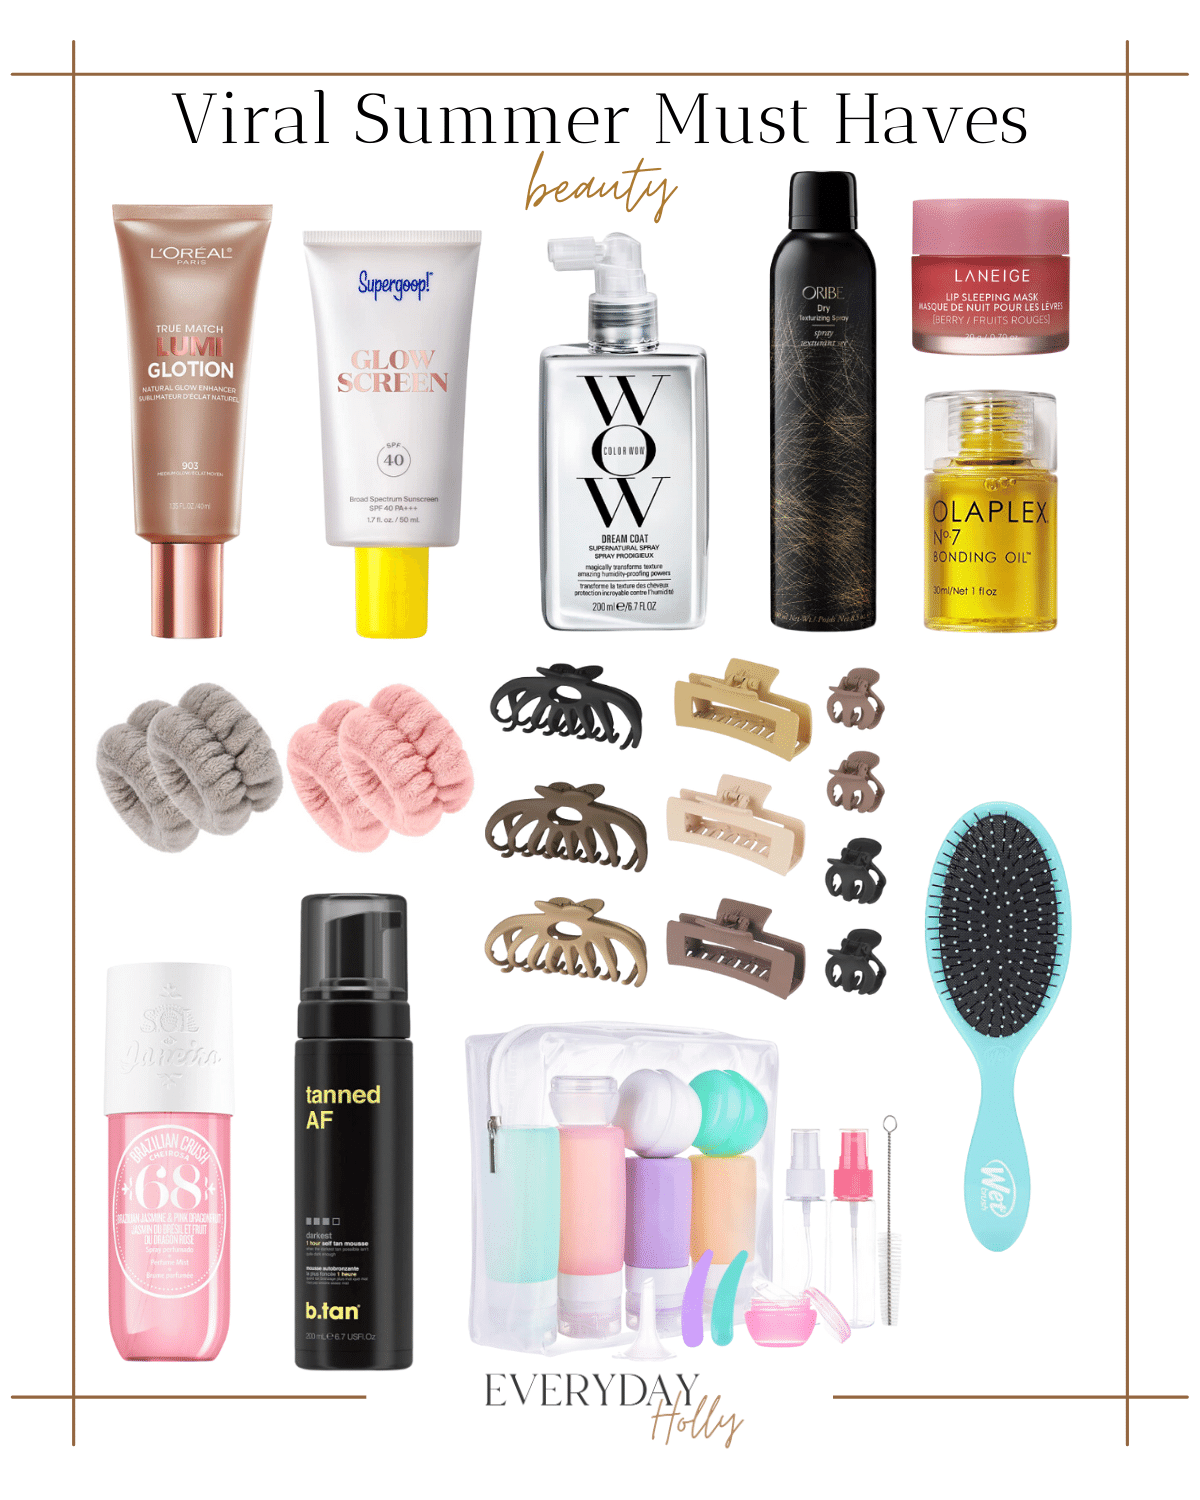 viral summer must haves, beauty favorite, summer beauty, trending amazon beauty, lumi glotion, supergoop, glow screen, wow dream coat, oribe texturizing spray, laneige, olaplex, claw clips, wet brush, sol de janeiro, tanned af self tanner 